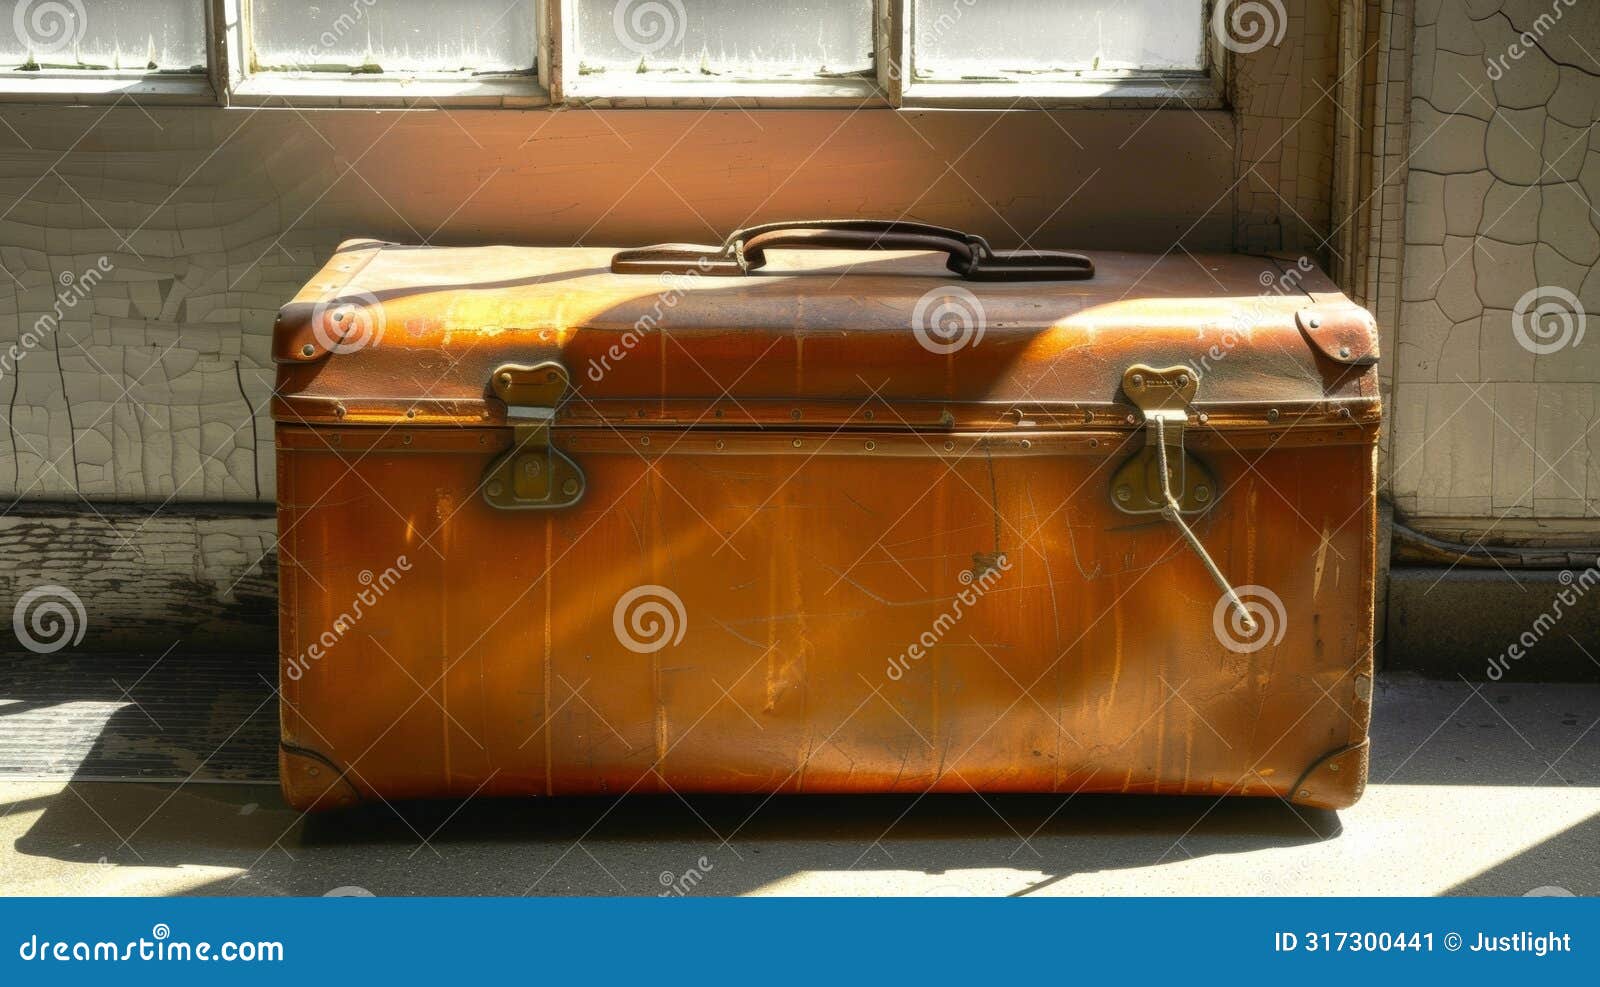 the sunlight catches the reflective surface of a trusty suitcase as it rests against the airport window patiently